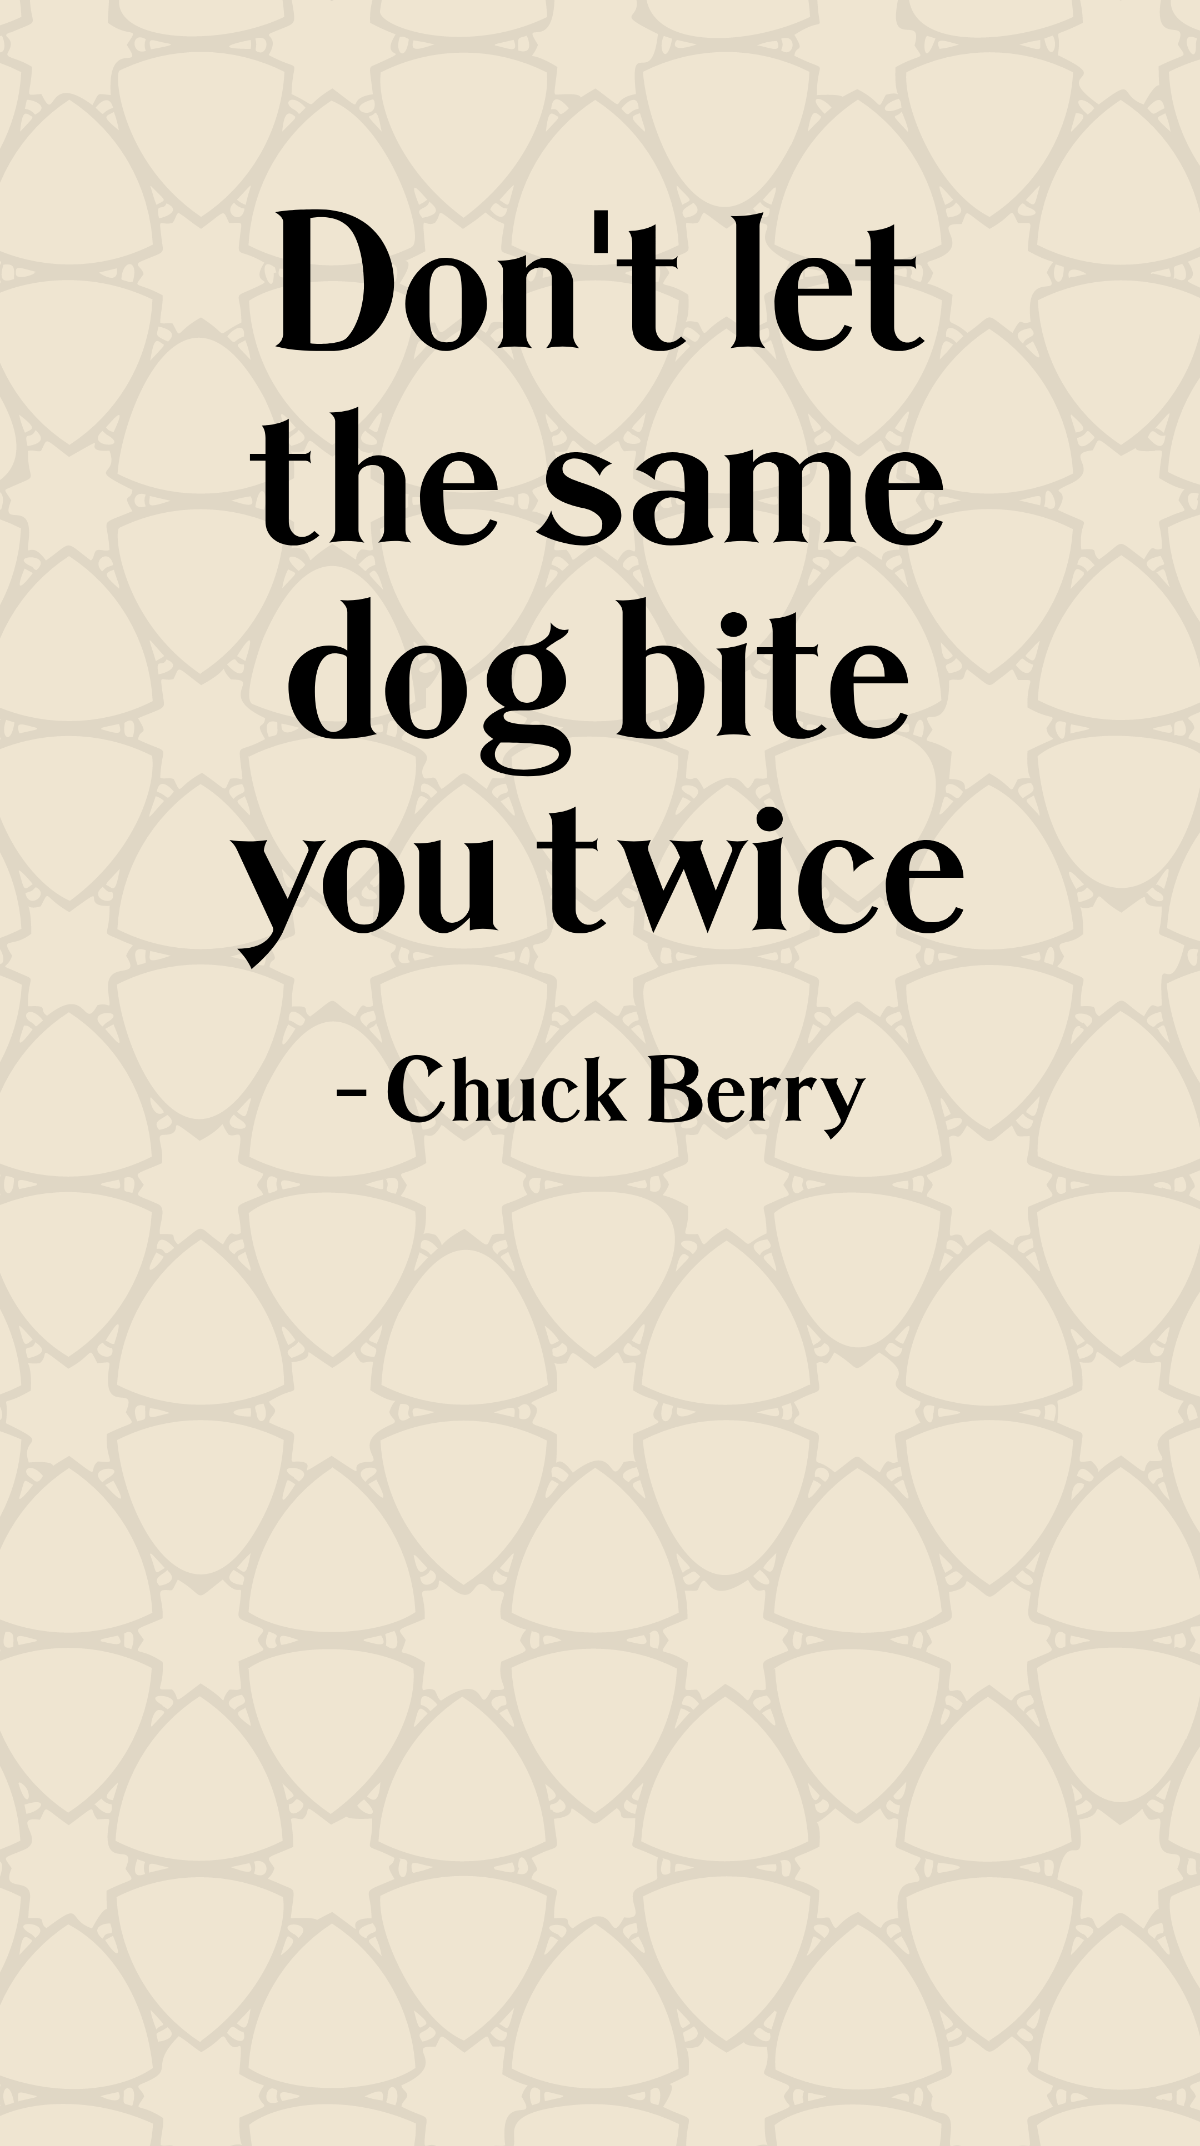 Chuck Berry - Don't let the same dog bite you twice